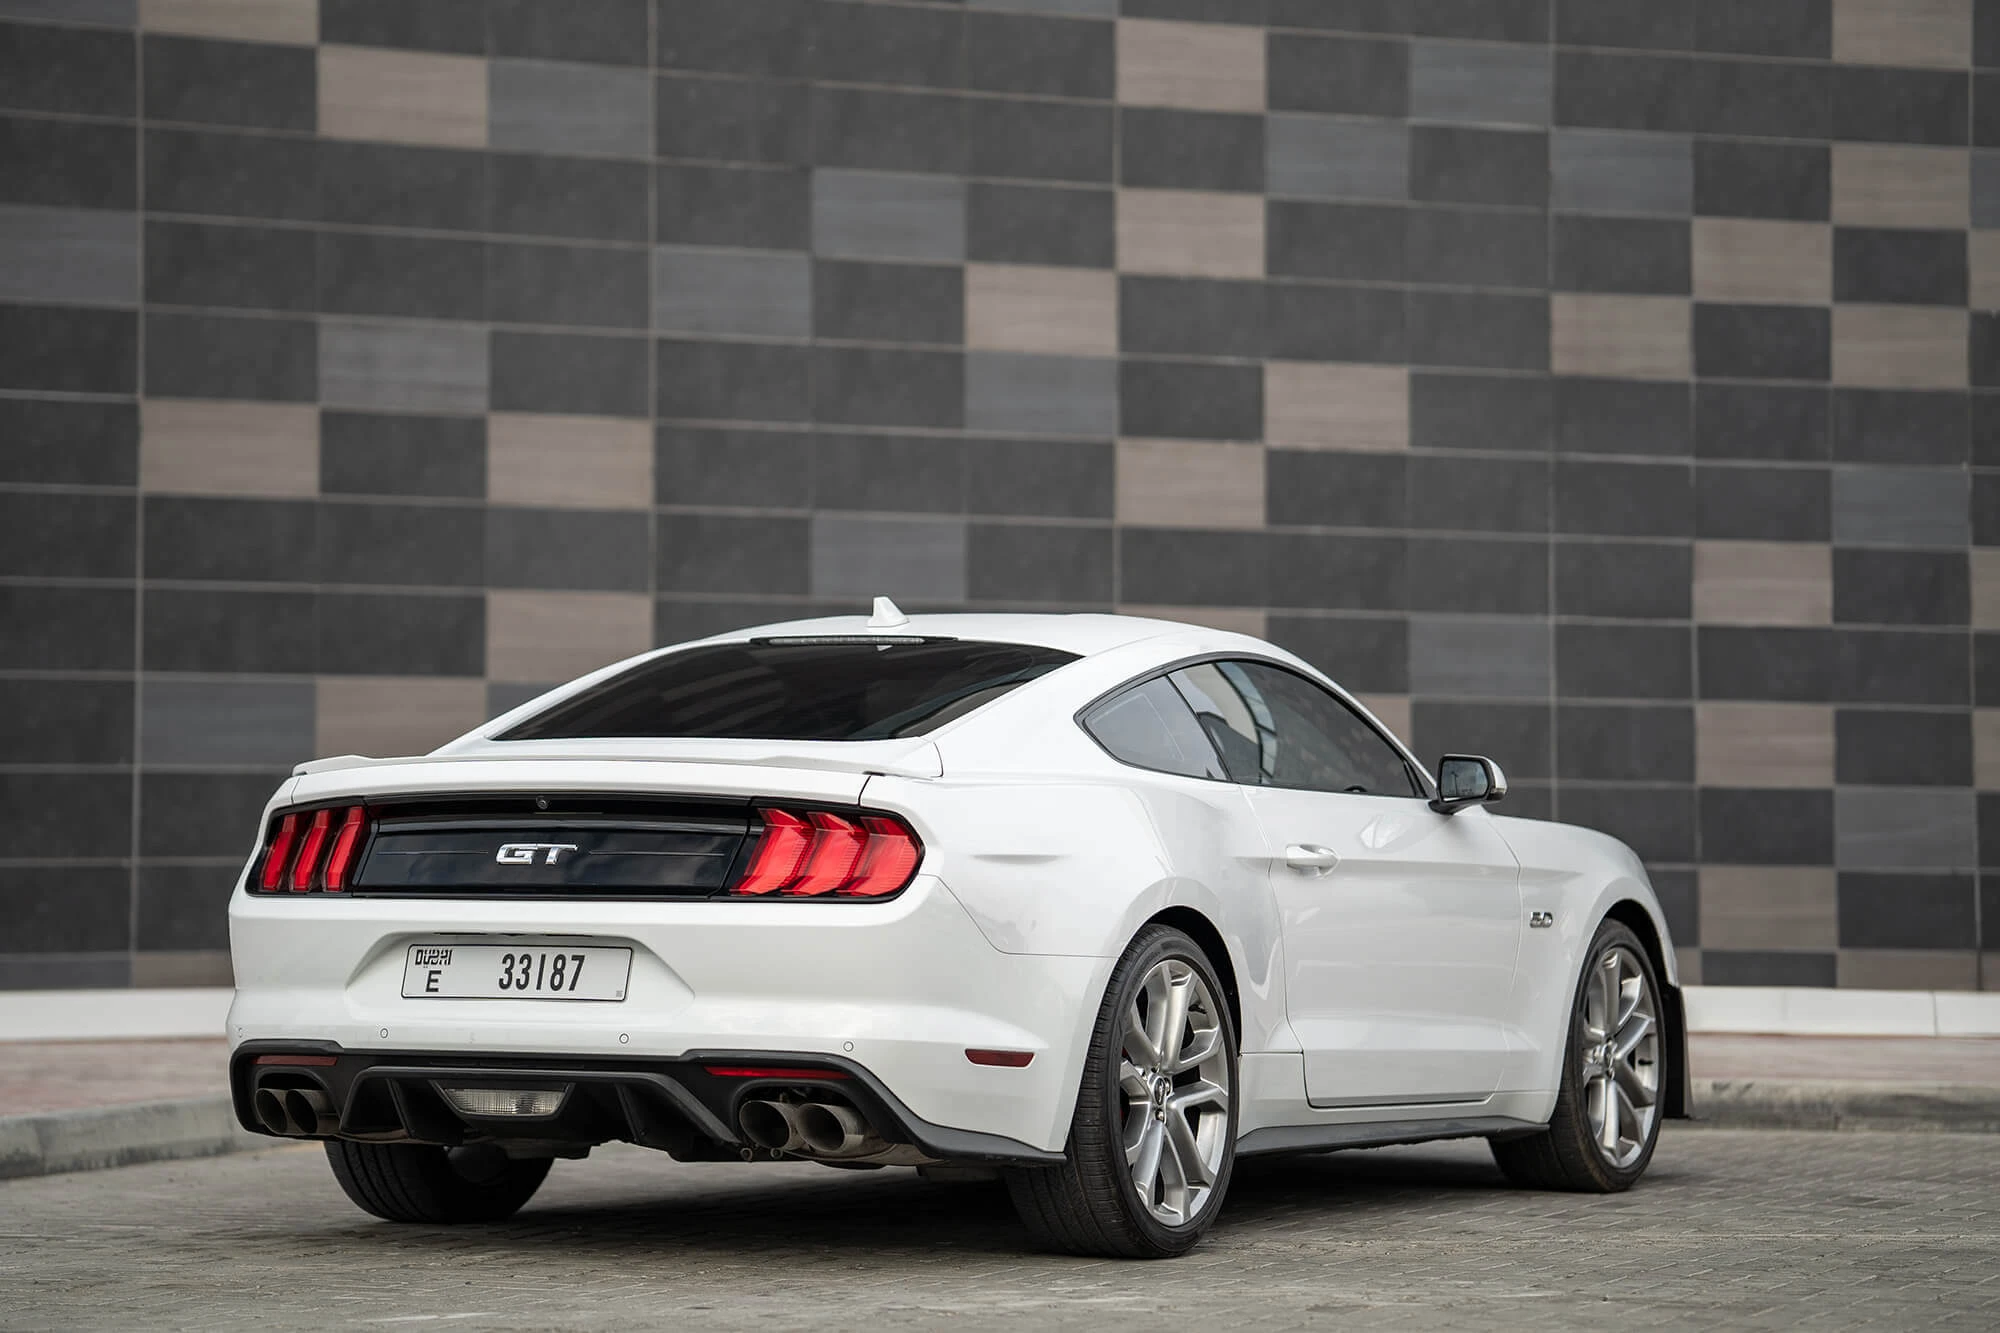 Ford Mustang GT Branco